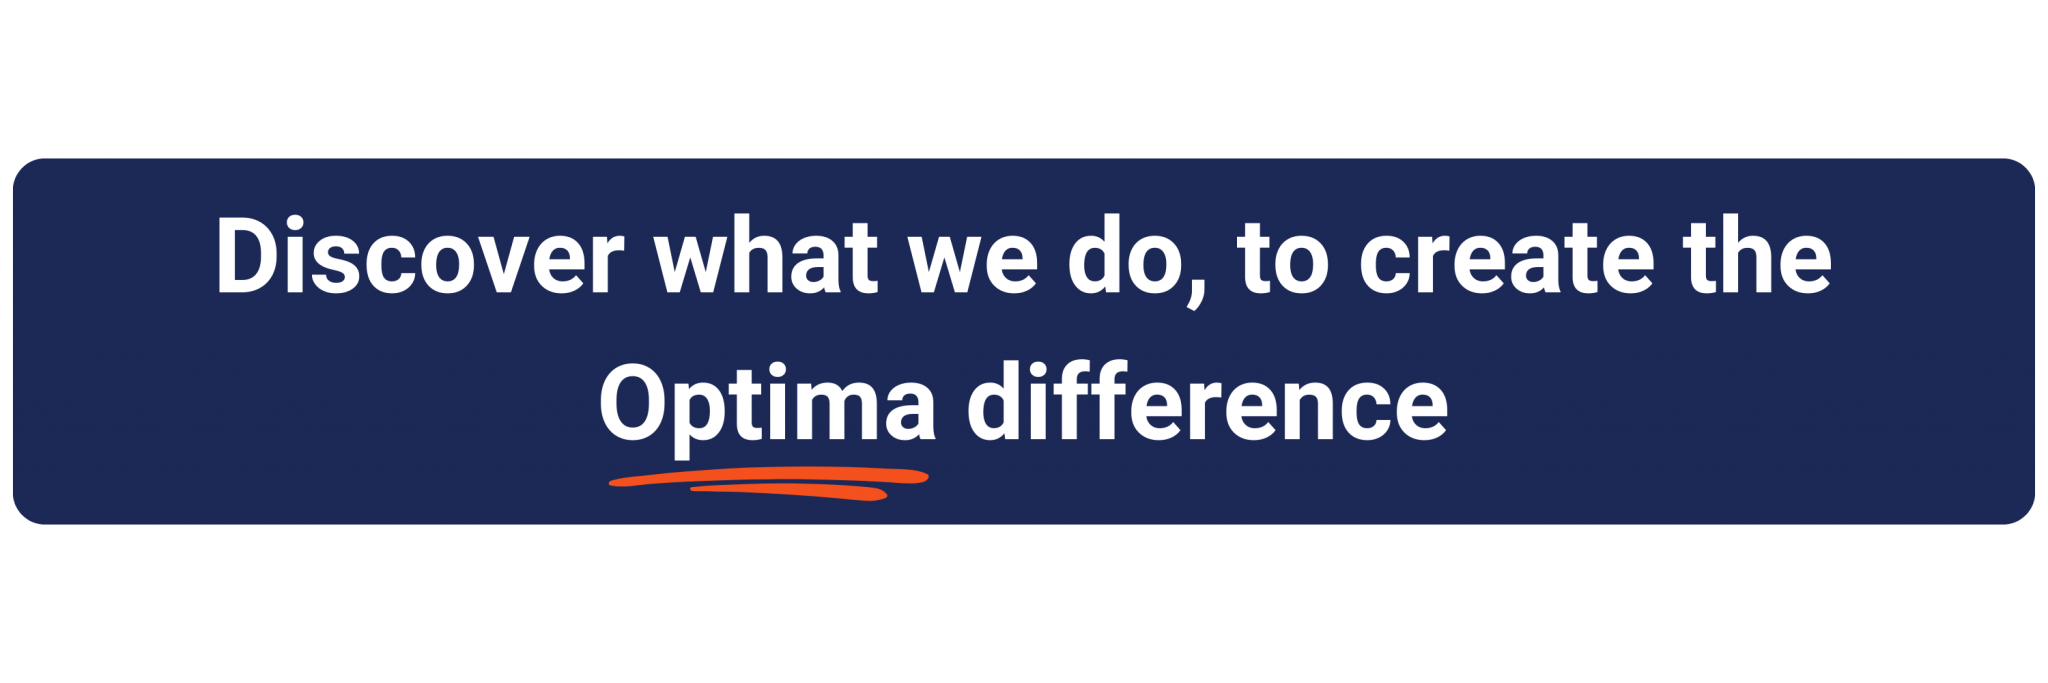 Discover what we do, to create the Optima difference